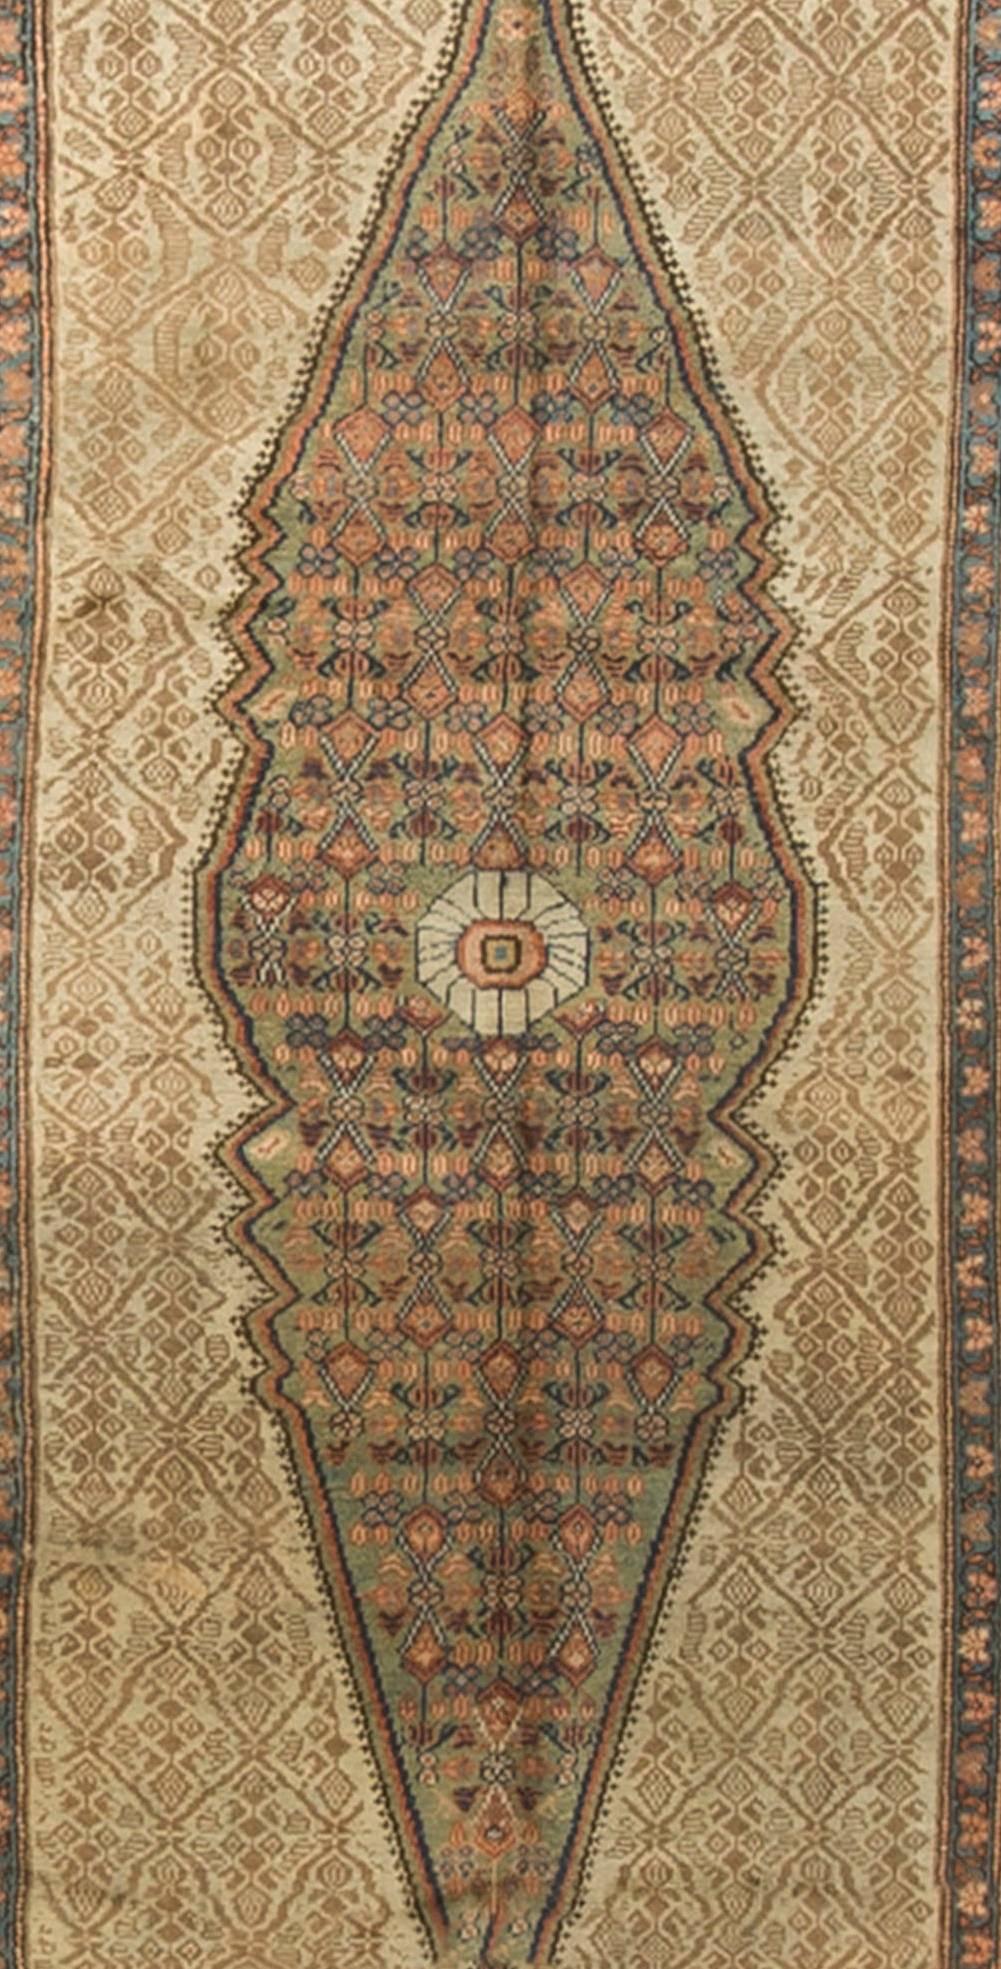 A lovely example of a camel wool handwoven Serab runner. The camel main ground with a central medallion surrounded by a main border in soft blues. The detail in the design has been crafted so skilfully by the weavers to create this wonderful runner.